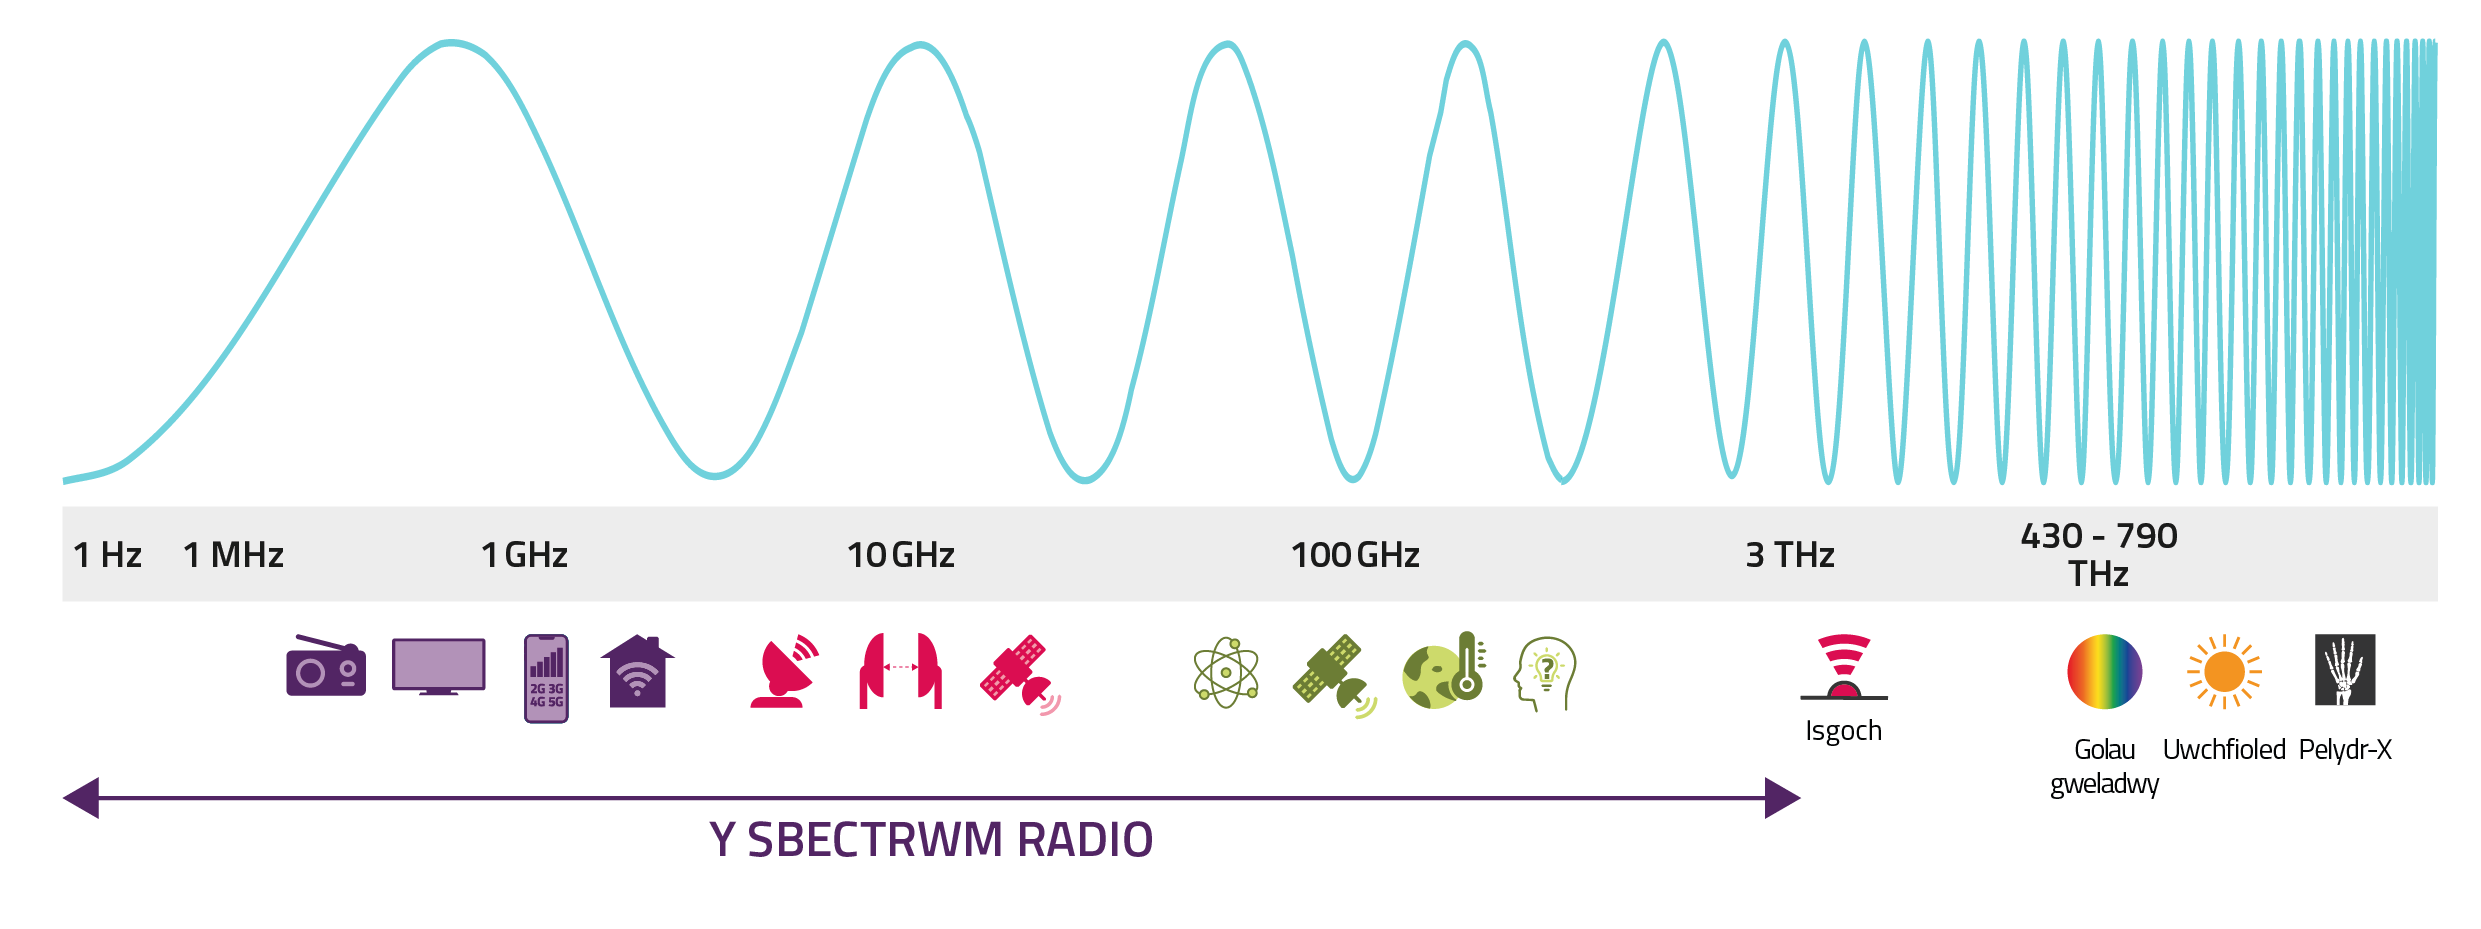 The electromagnetic spectrum includes the radio waves spectrum, infrared, visible light, ultraviolet and x-rays above this. The radio spectrum covers frequencies between 3 Hz and 3 THz. The diagram illustrates that as frequency increases, the length of the waves gets shorter.